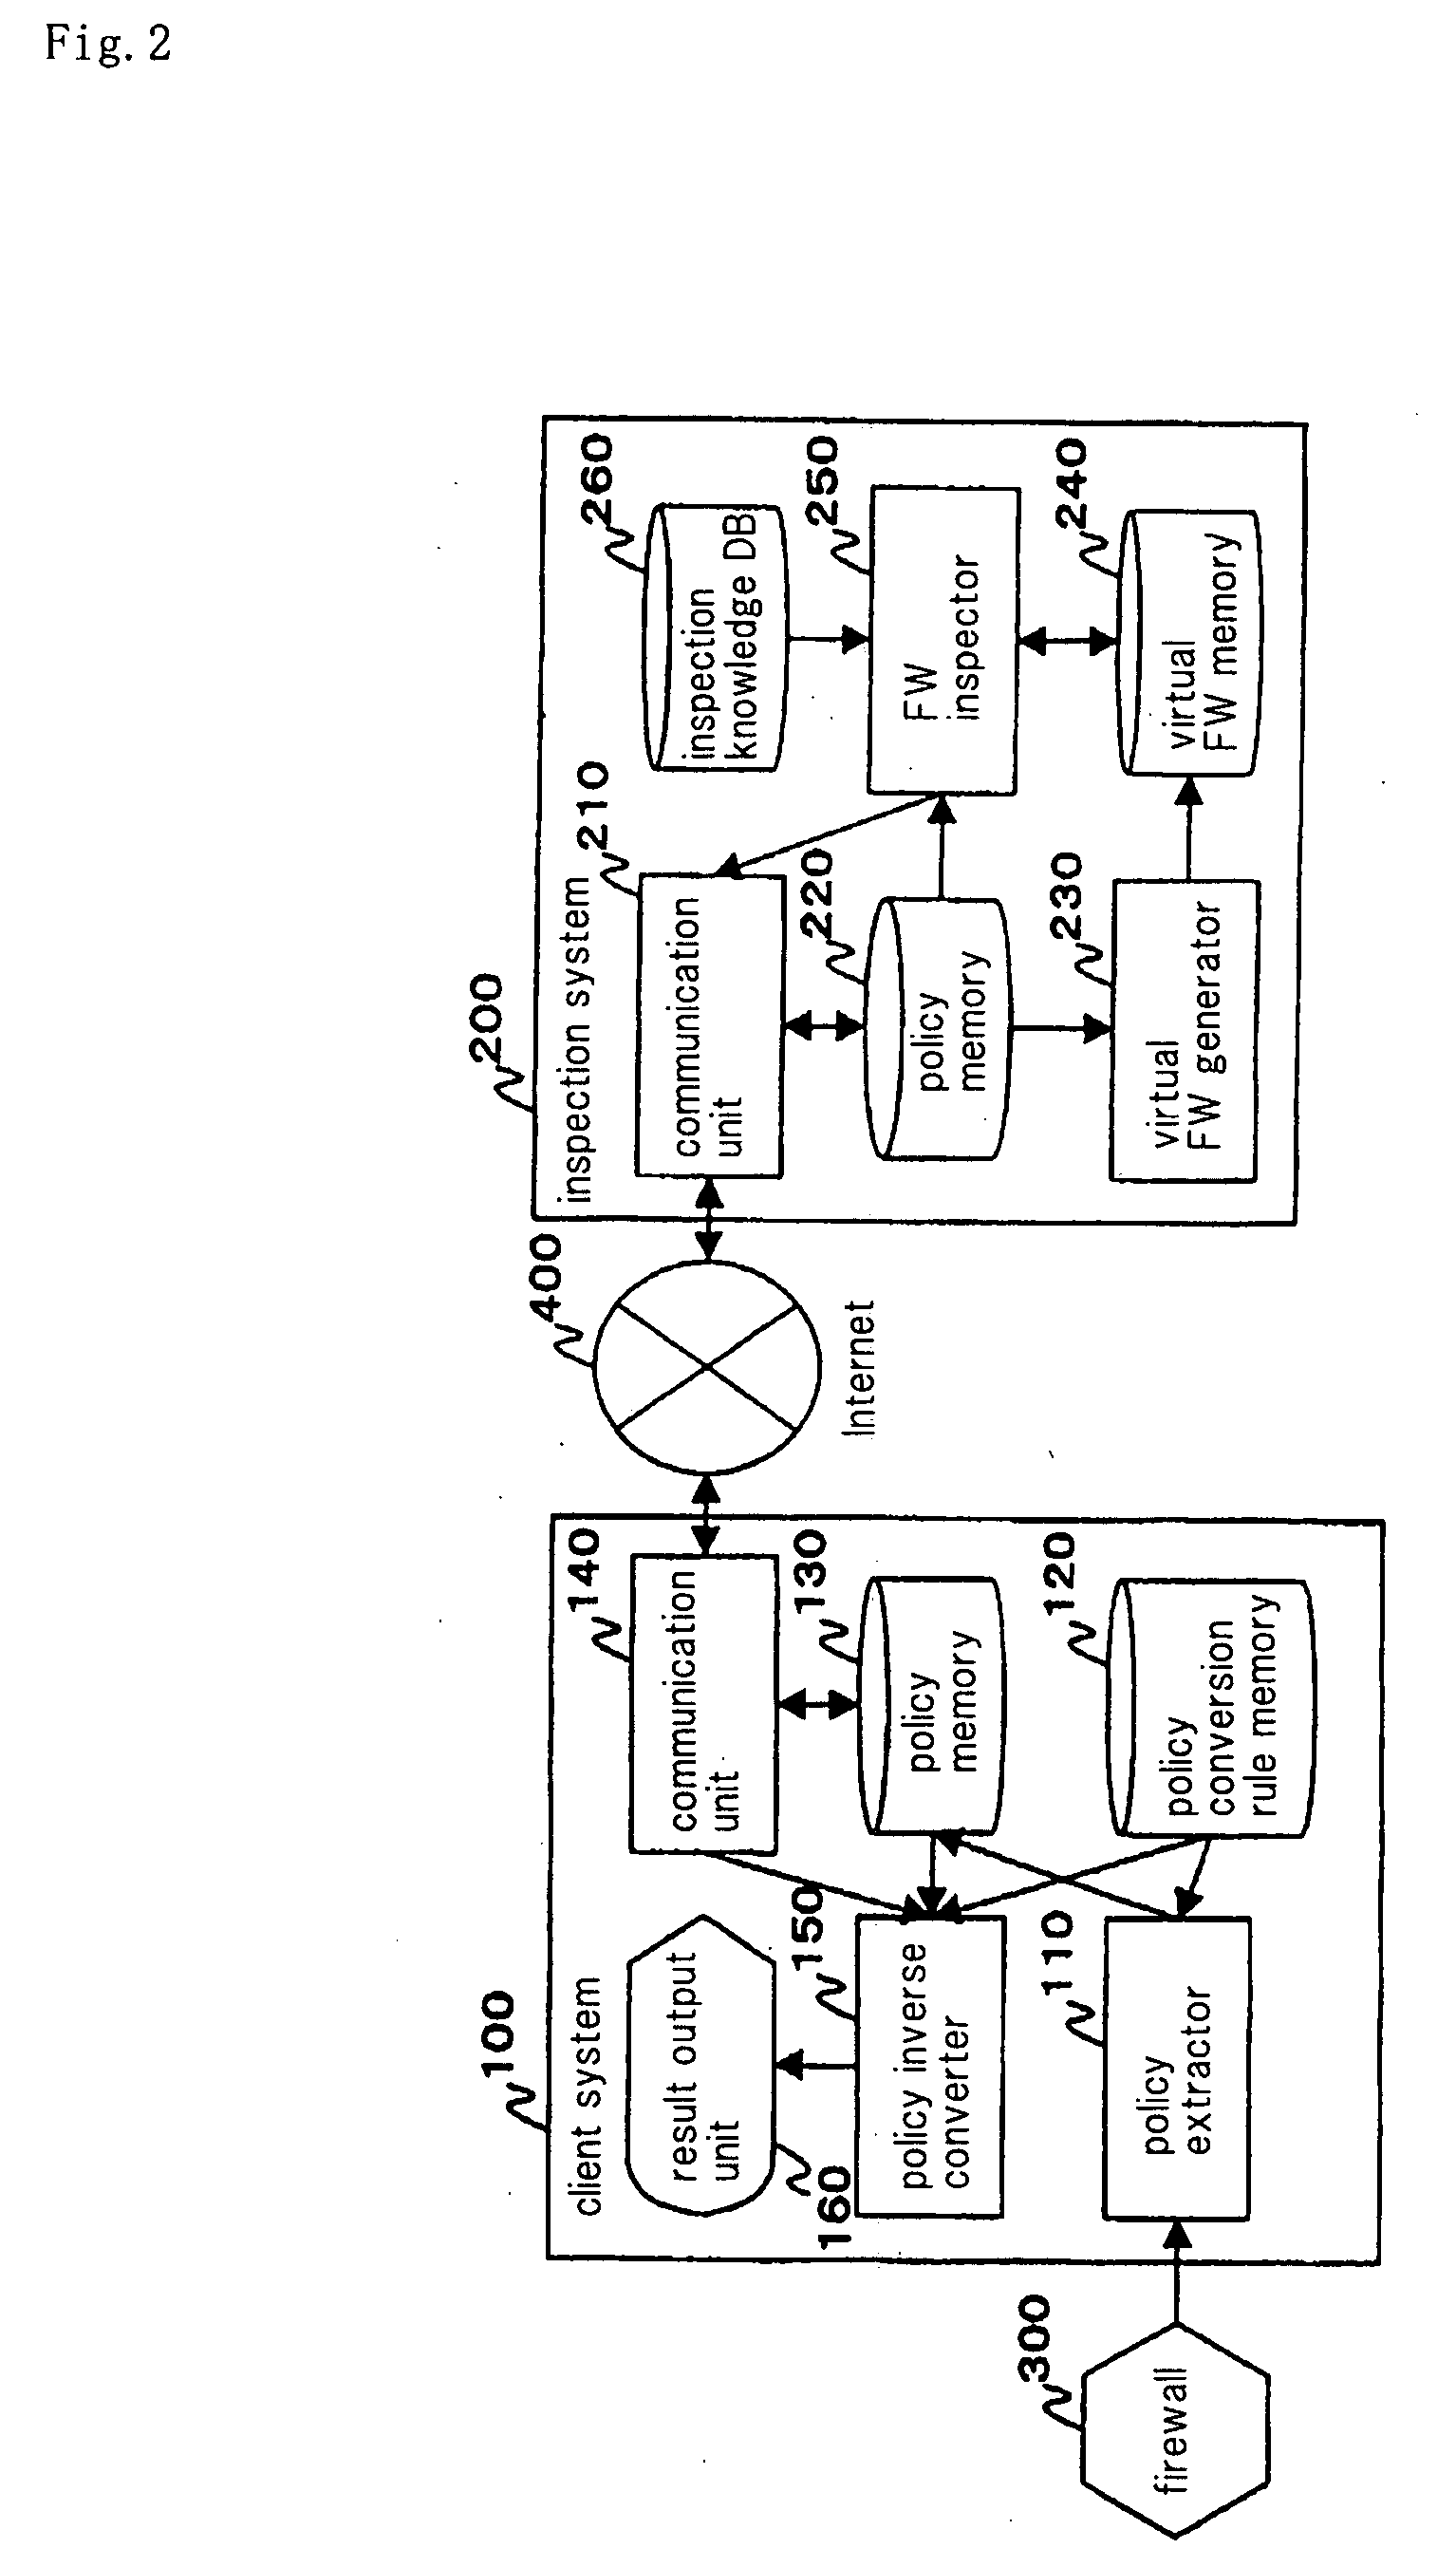 Firewall Inspecting System and Firewall Information Extraction System